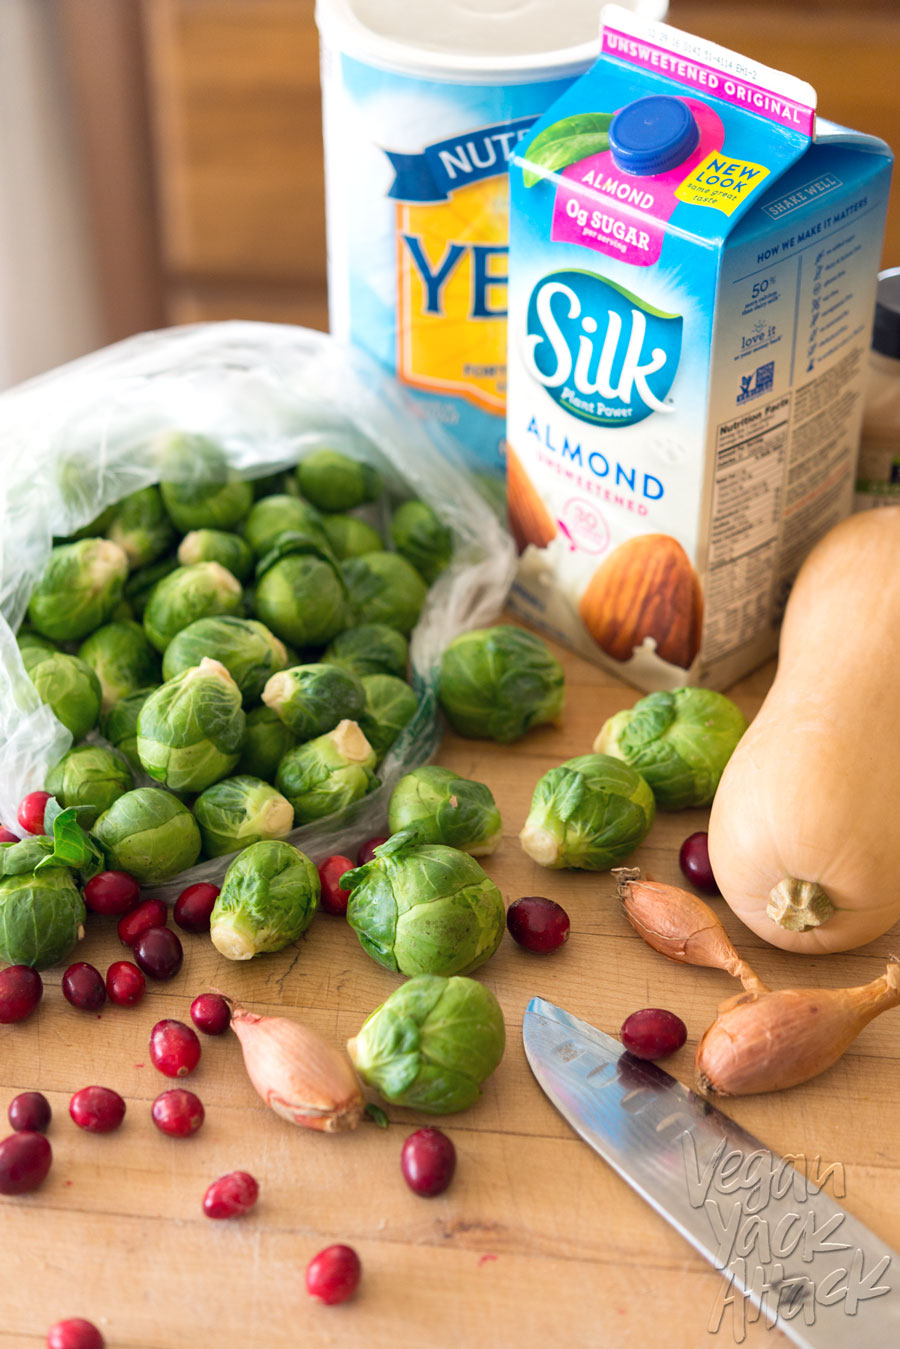 Fresh Brussels sprouts falling out of a bag, next to cranberries, shallots, butternut squash, nutritional yeast, a knife, and a carton of non-dairy milk, on a wood countertop.